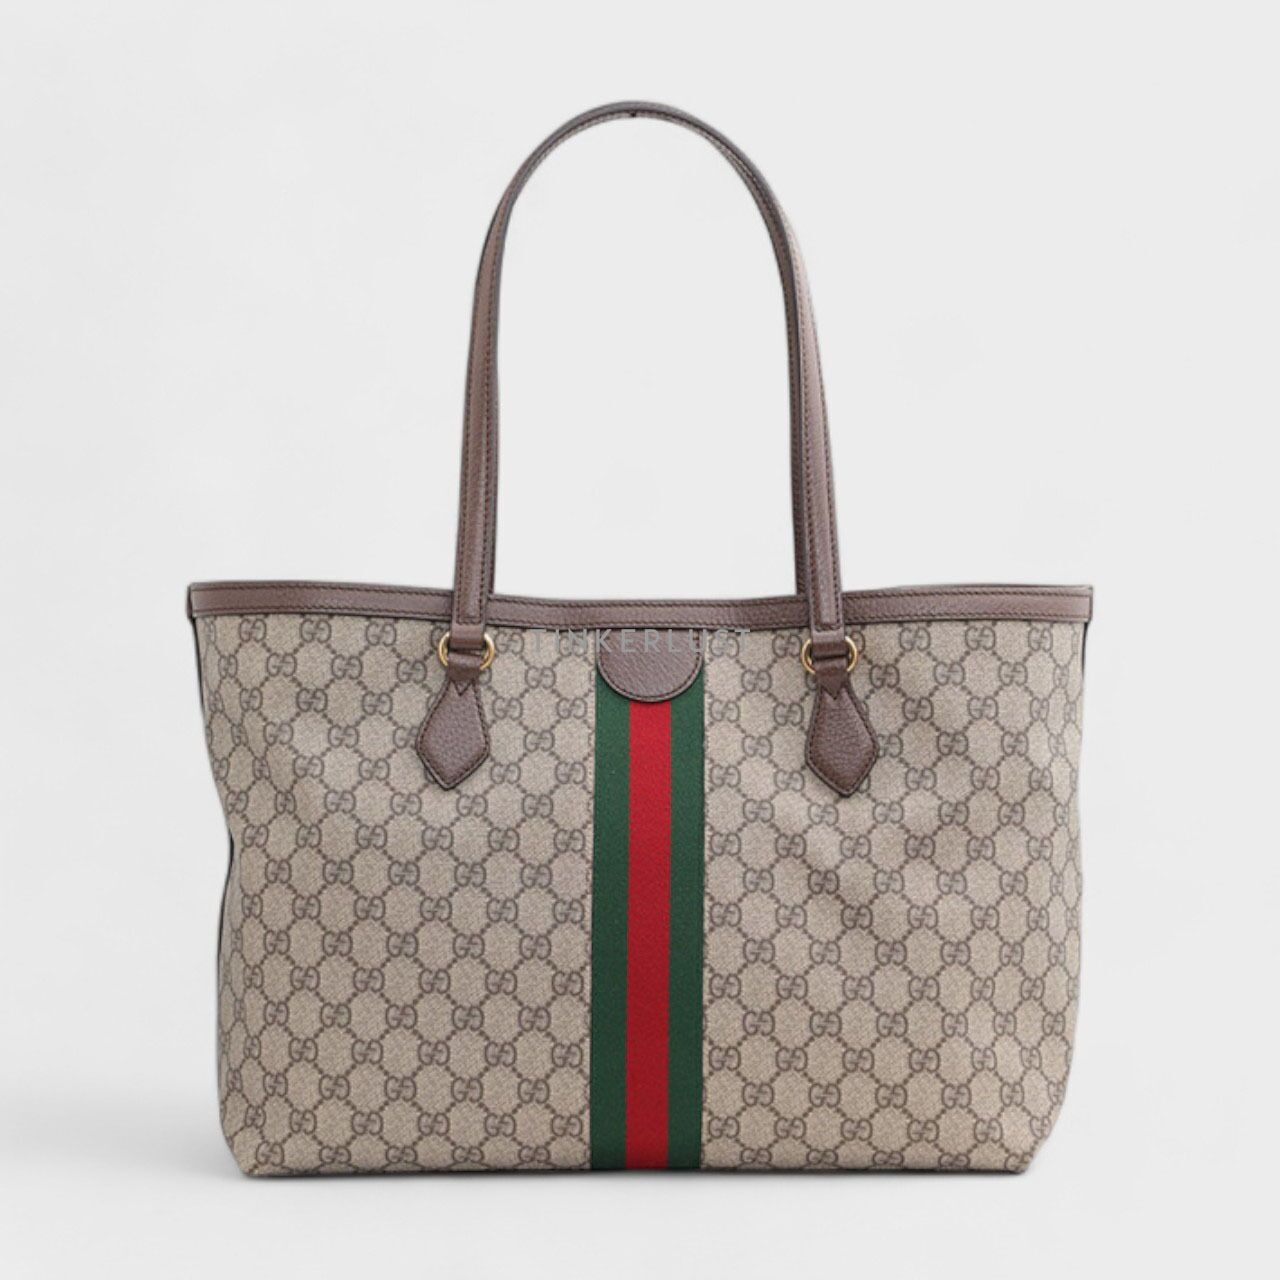 Gucci Medium GG Supreme Ophidia Tote Bag in Beige/Ebony with Green/Red Web